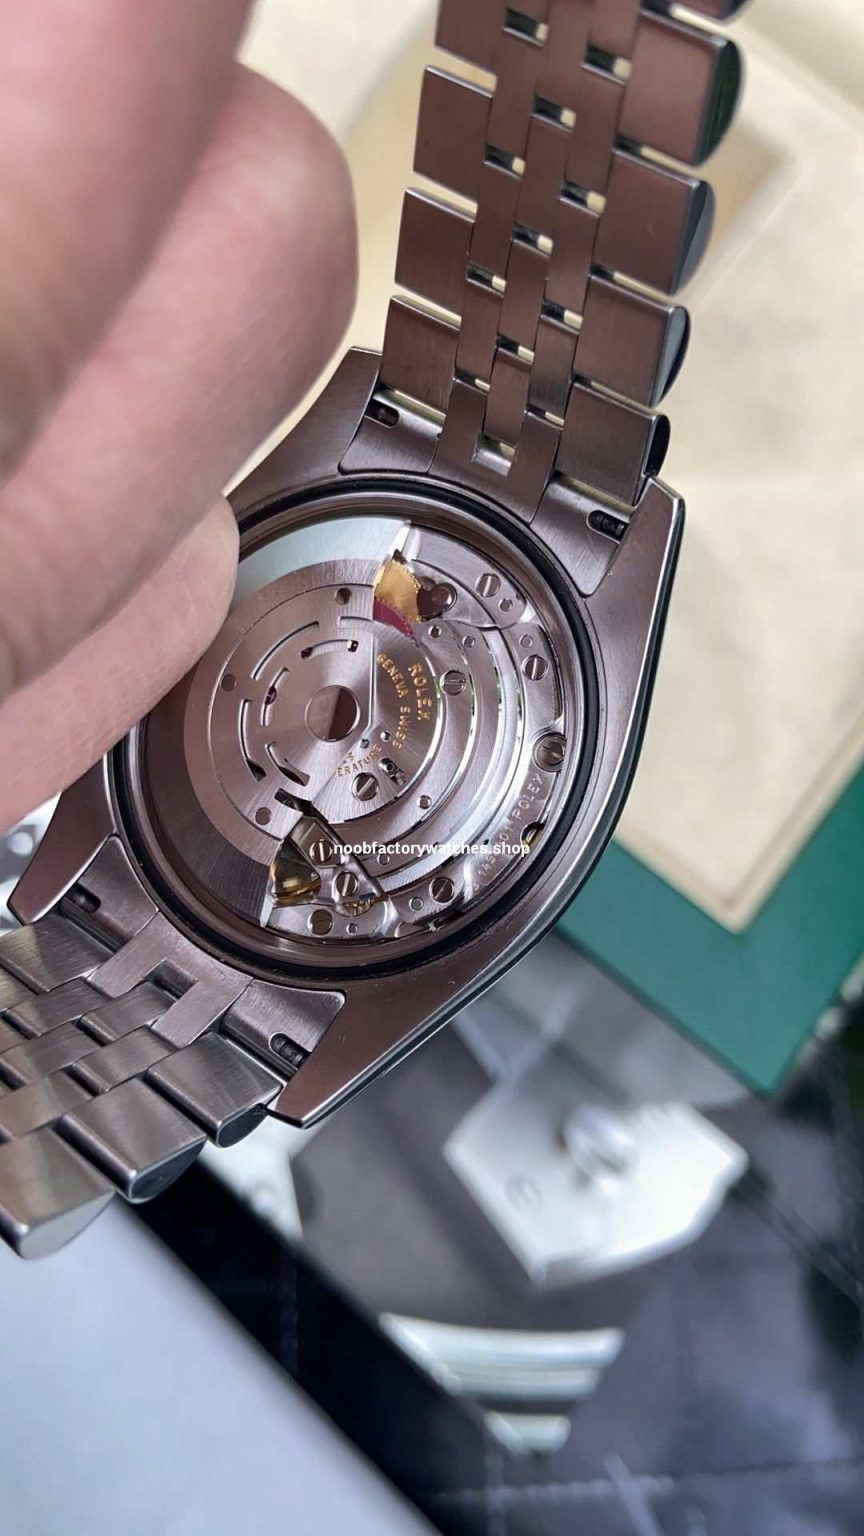 Genuine 2nd hand rolex 3135 movement - The N Factory